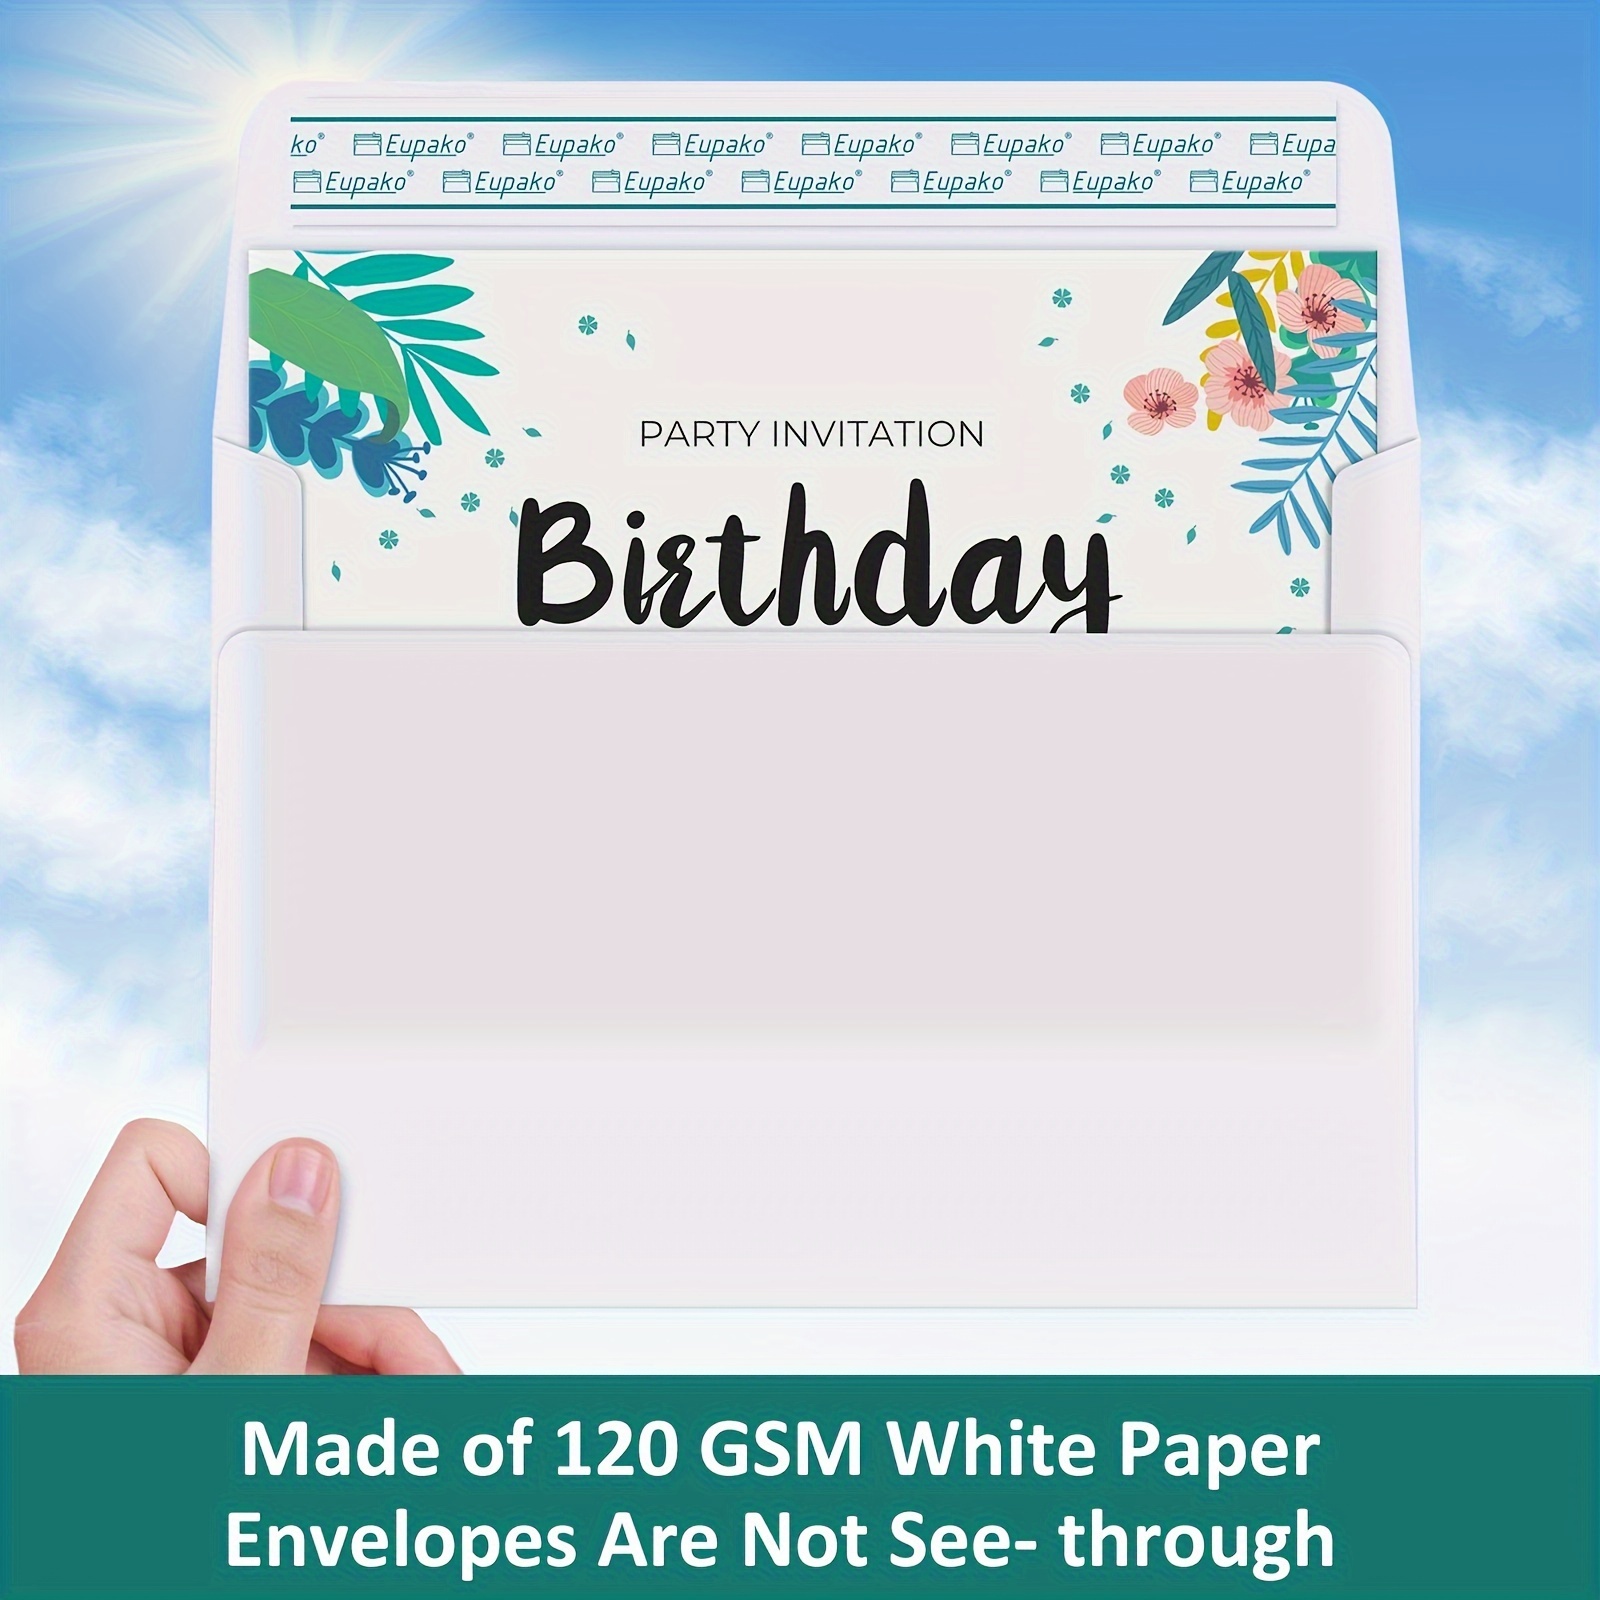 

50pcs, White-blank-cards-and-envelopes-4.125x5.5/5x7in-heavyweight-folded-cardstock-and-a2/a7-envelopes-self-seal For Greeting Cards, Invitations, Wedding, Baby Shower, Birthday